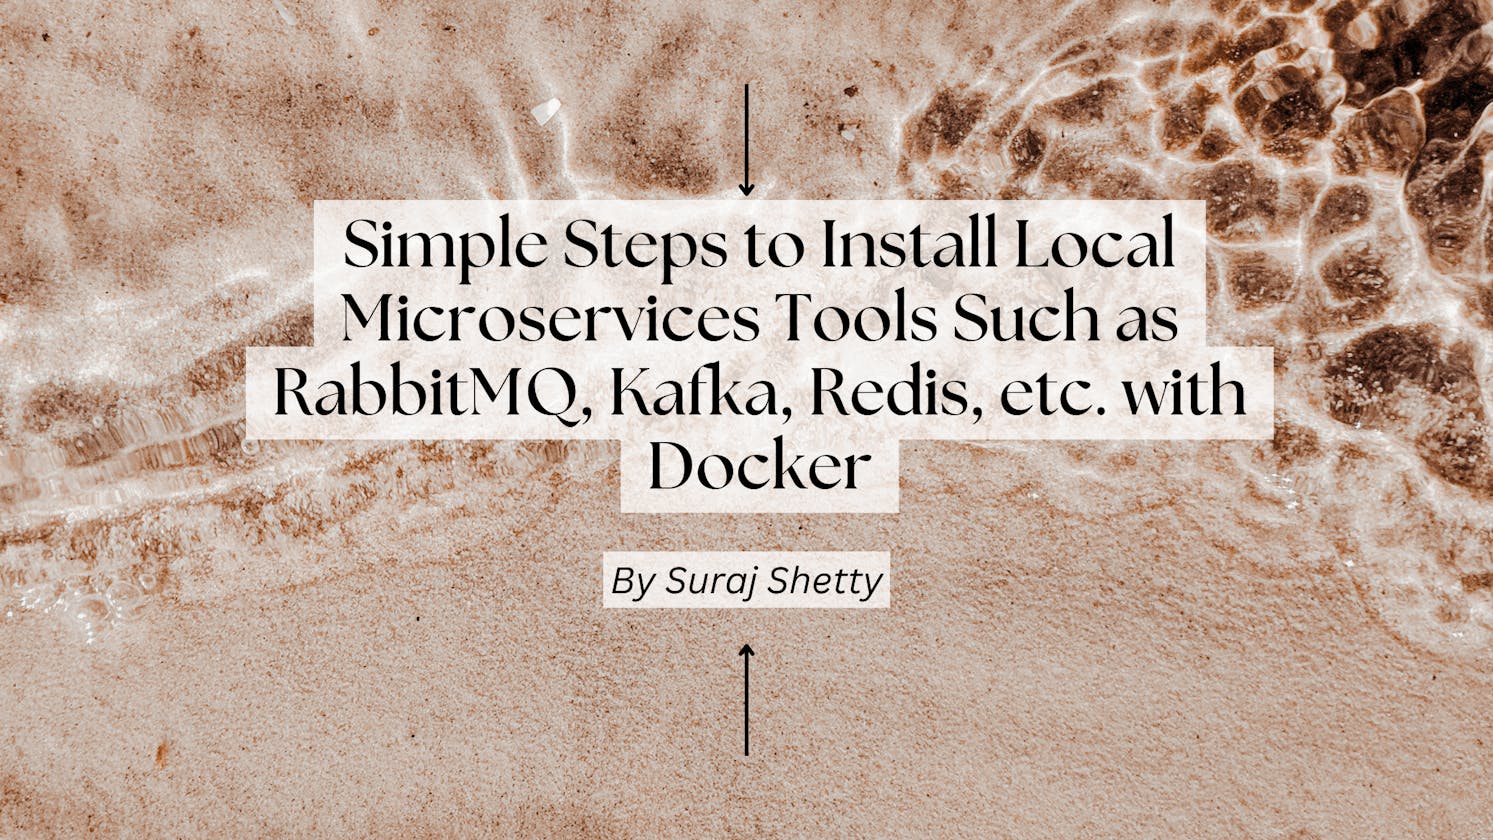 Simple Steps to Install Local Microservices Tools Such as RabbitMQ, Kafka, Redis, etc. with Docker